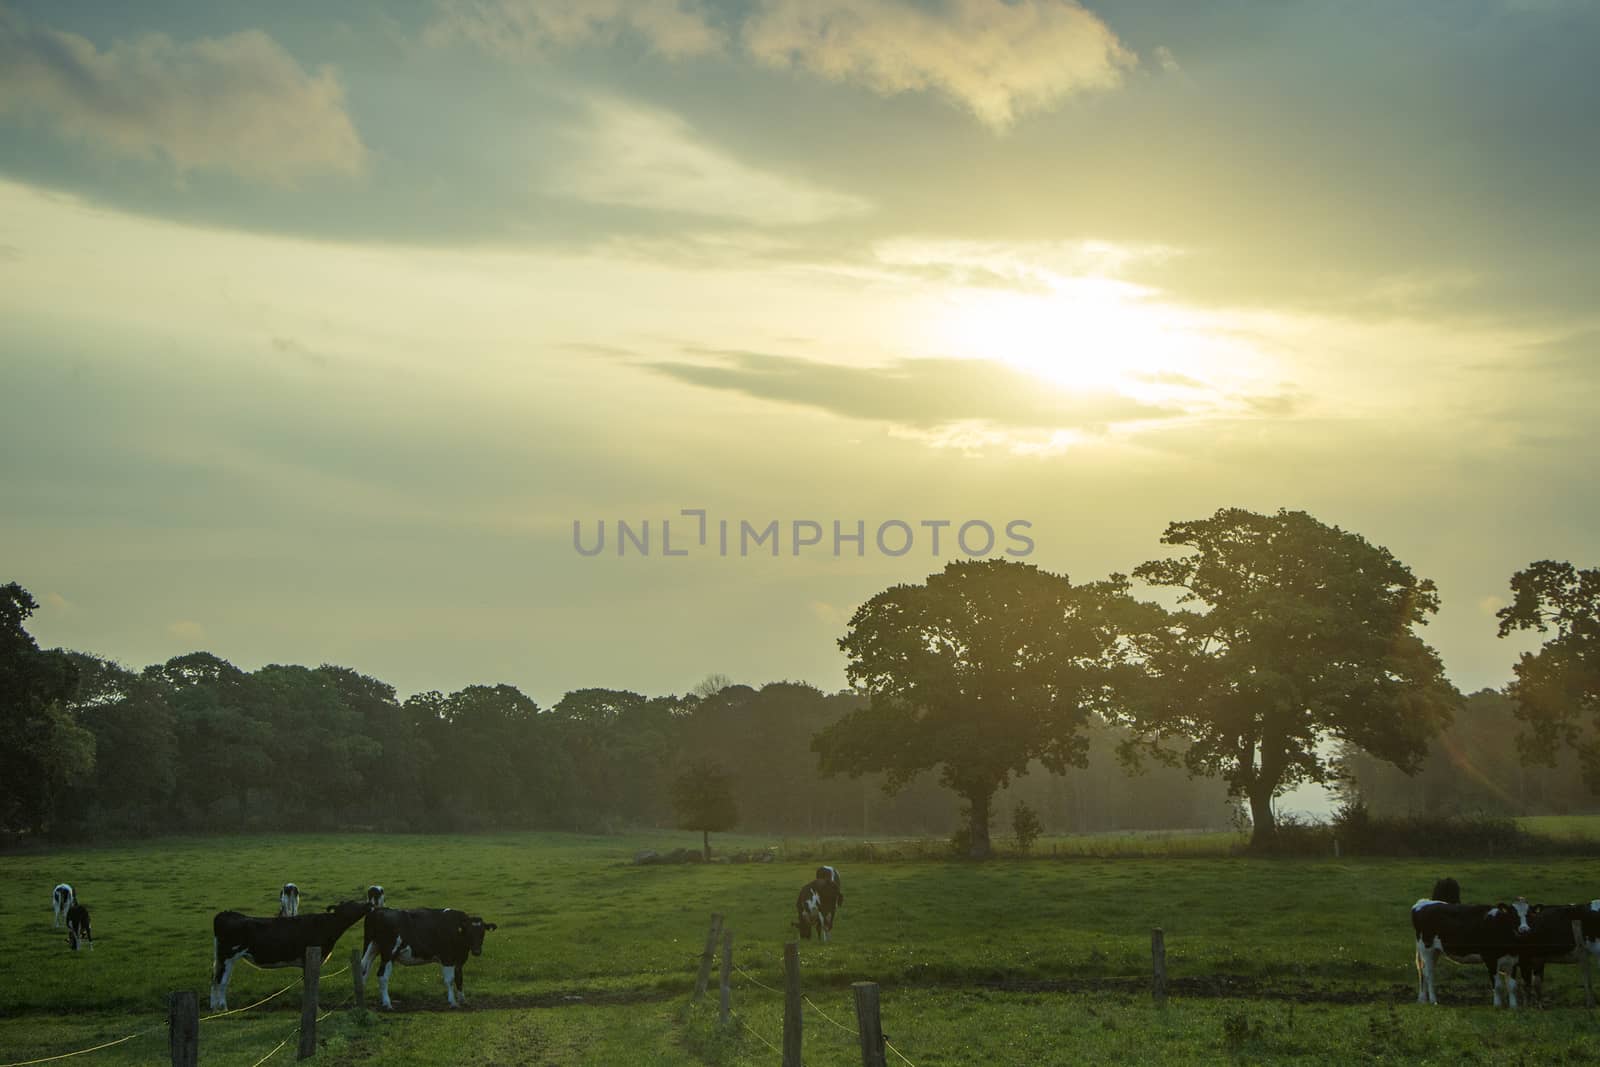 Sunrise behind clouds and green field with cows on a cloudy day.